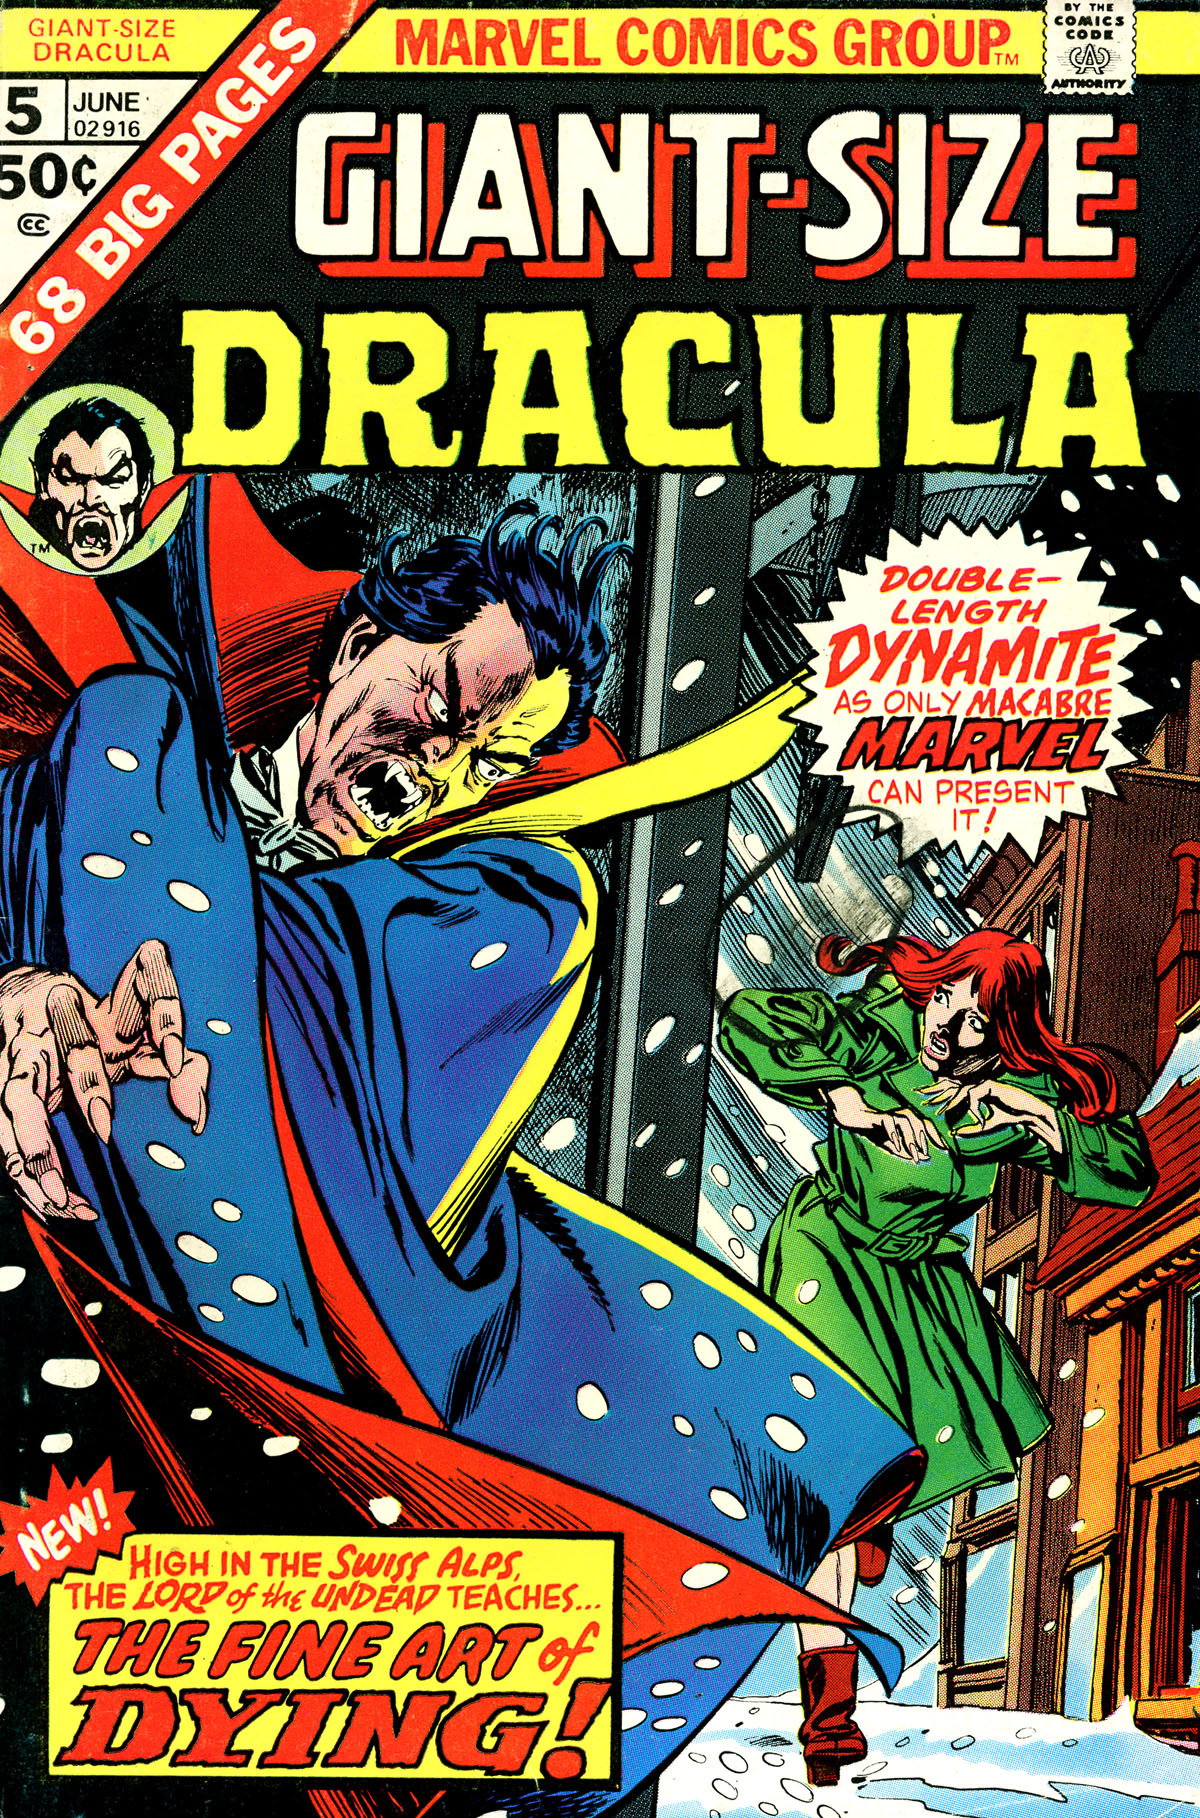 Read online Giant-Size Dracula comic -  Issue #5 - 1